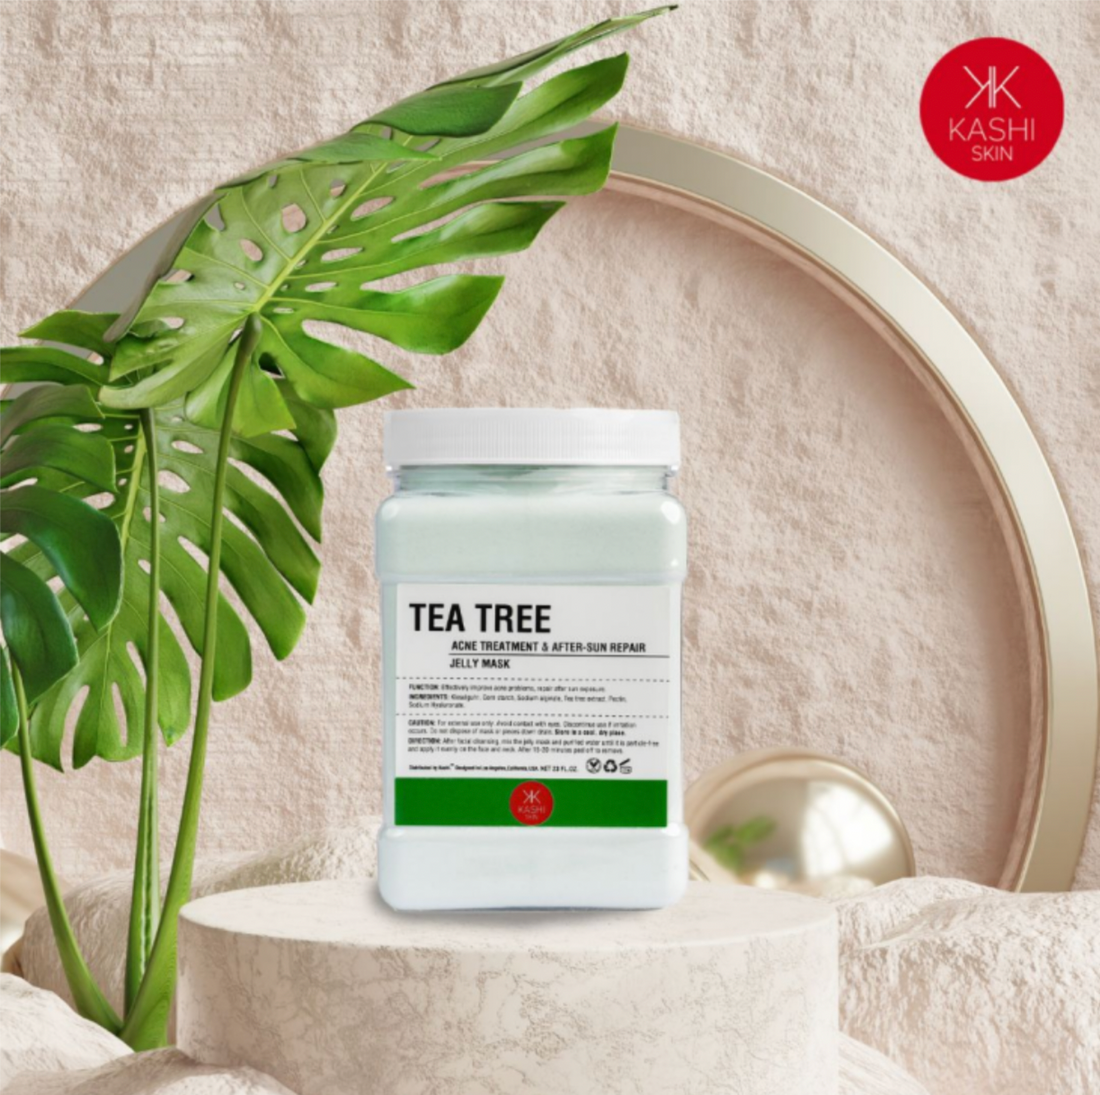 What are the benefits of tea tree in skin-care products?